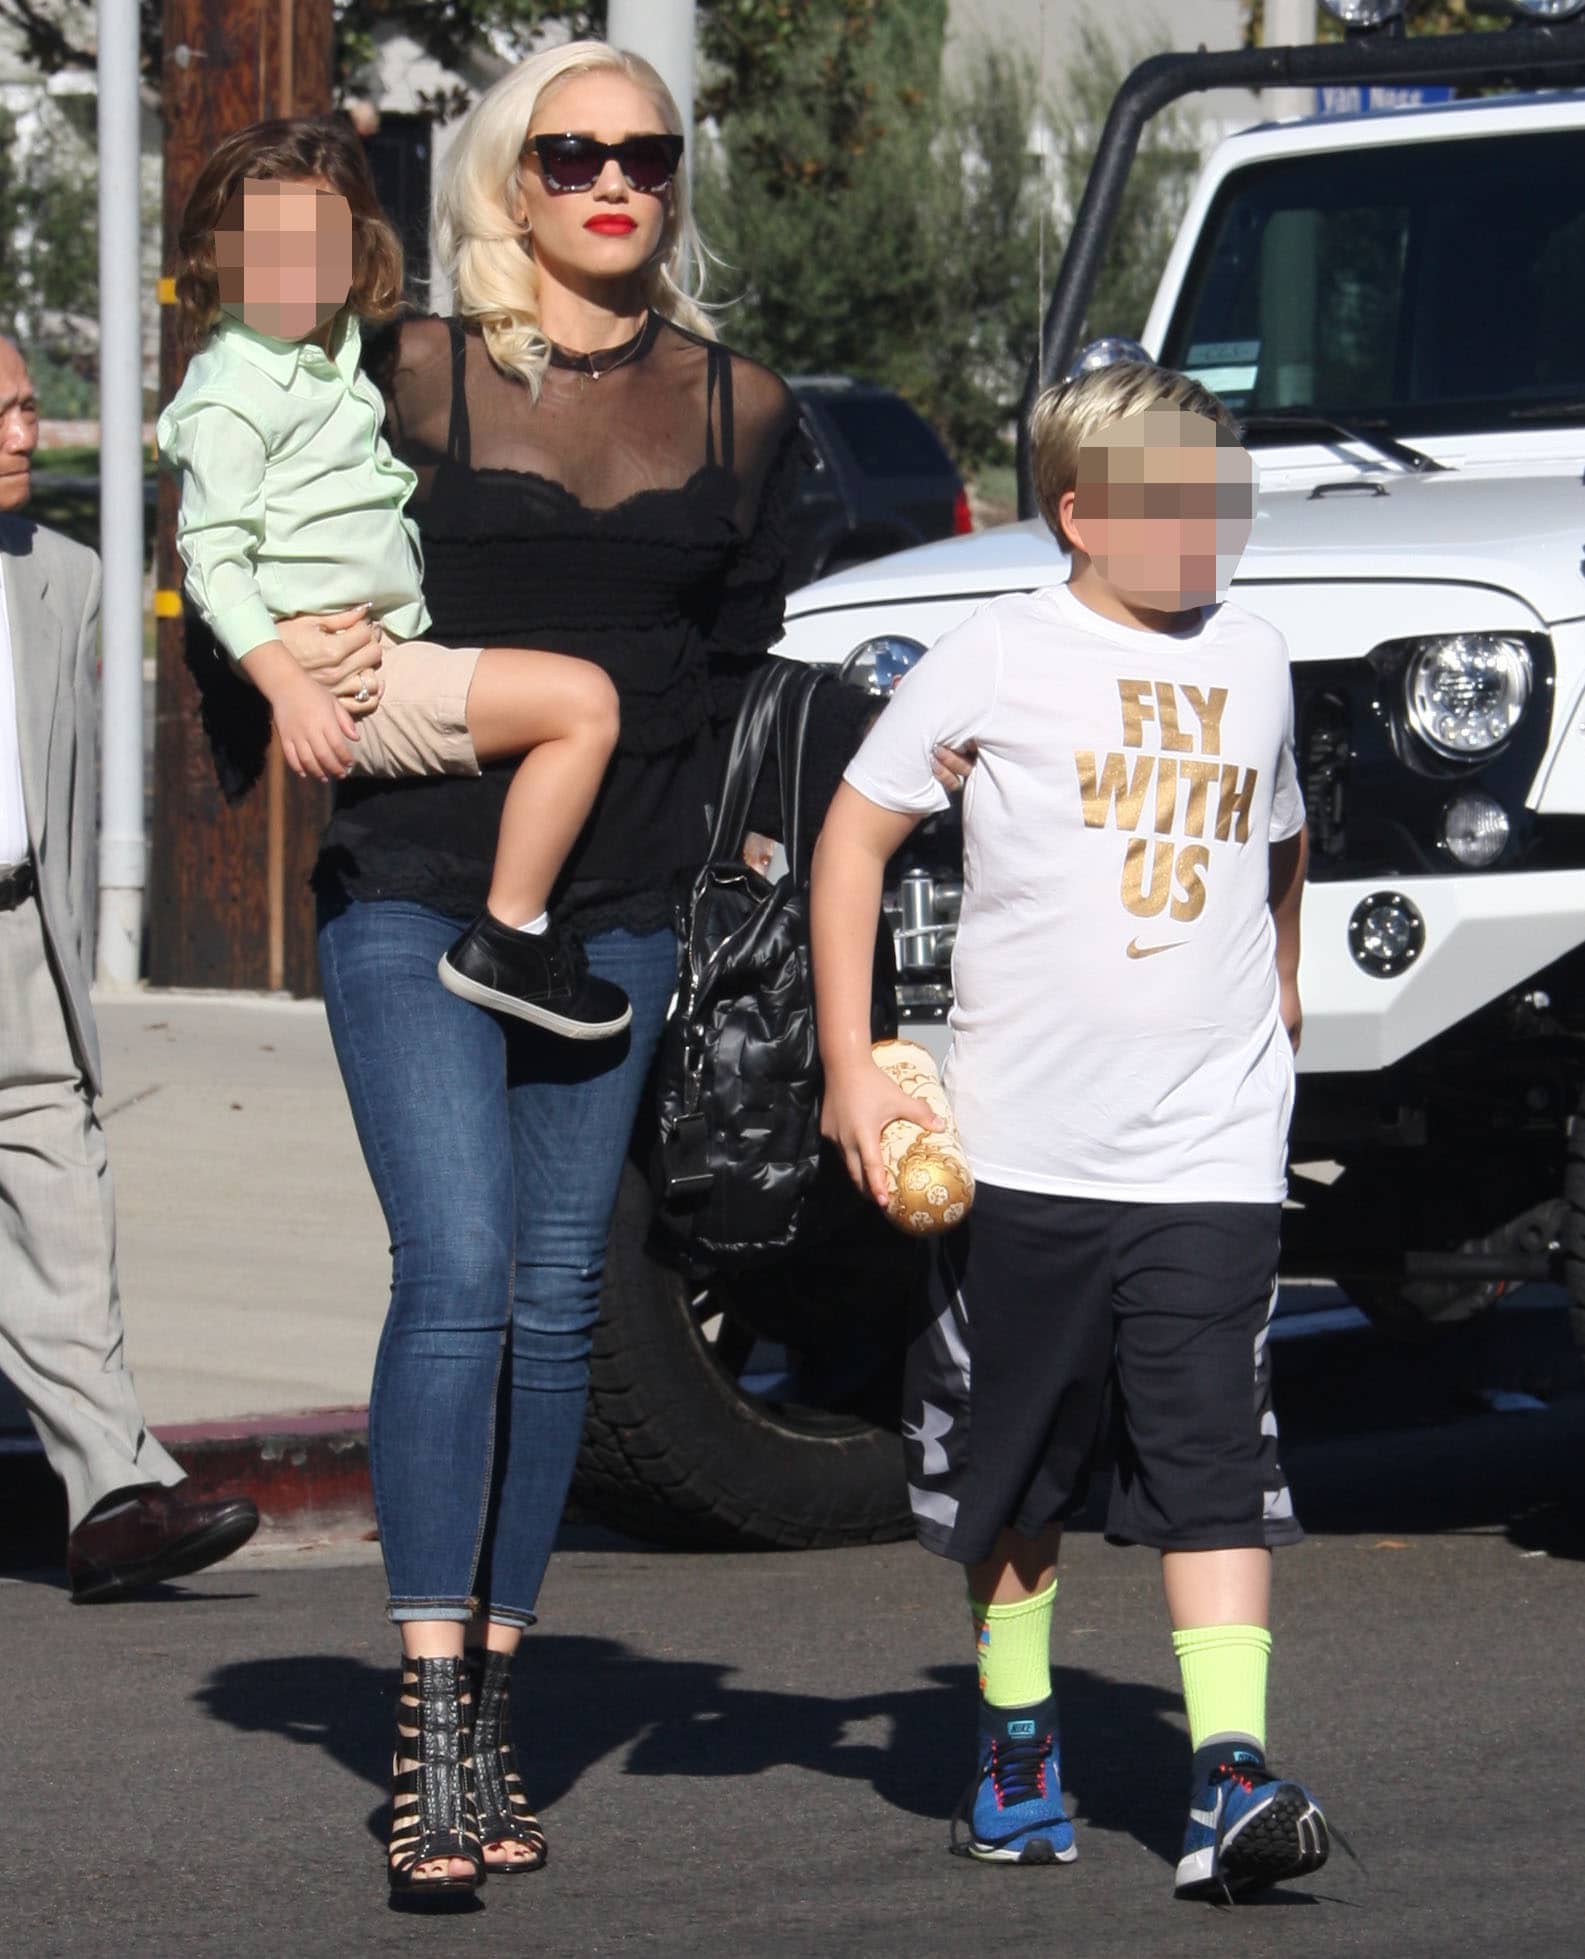 Gwen Stefani attends church service in skinny jeans on October 22, 2017